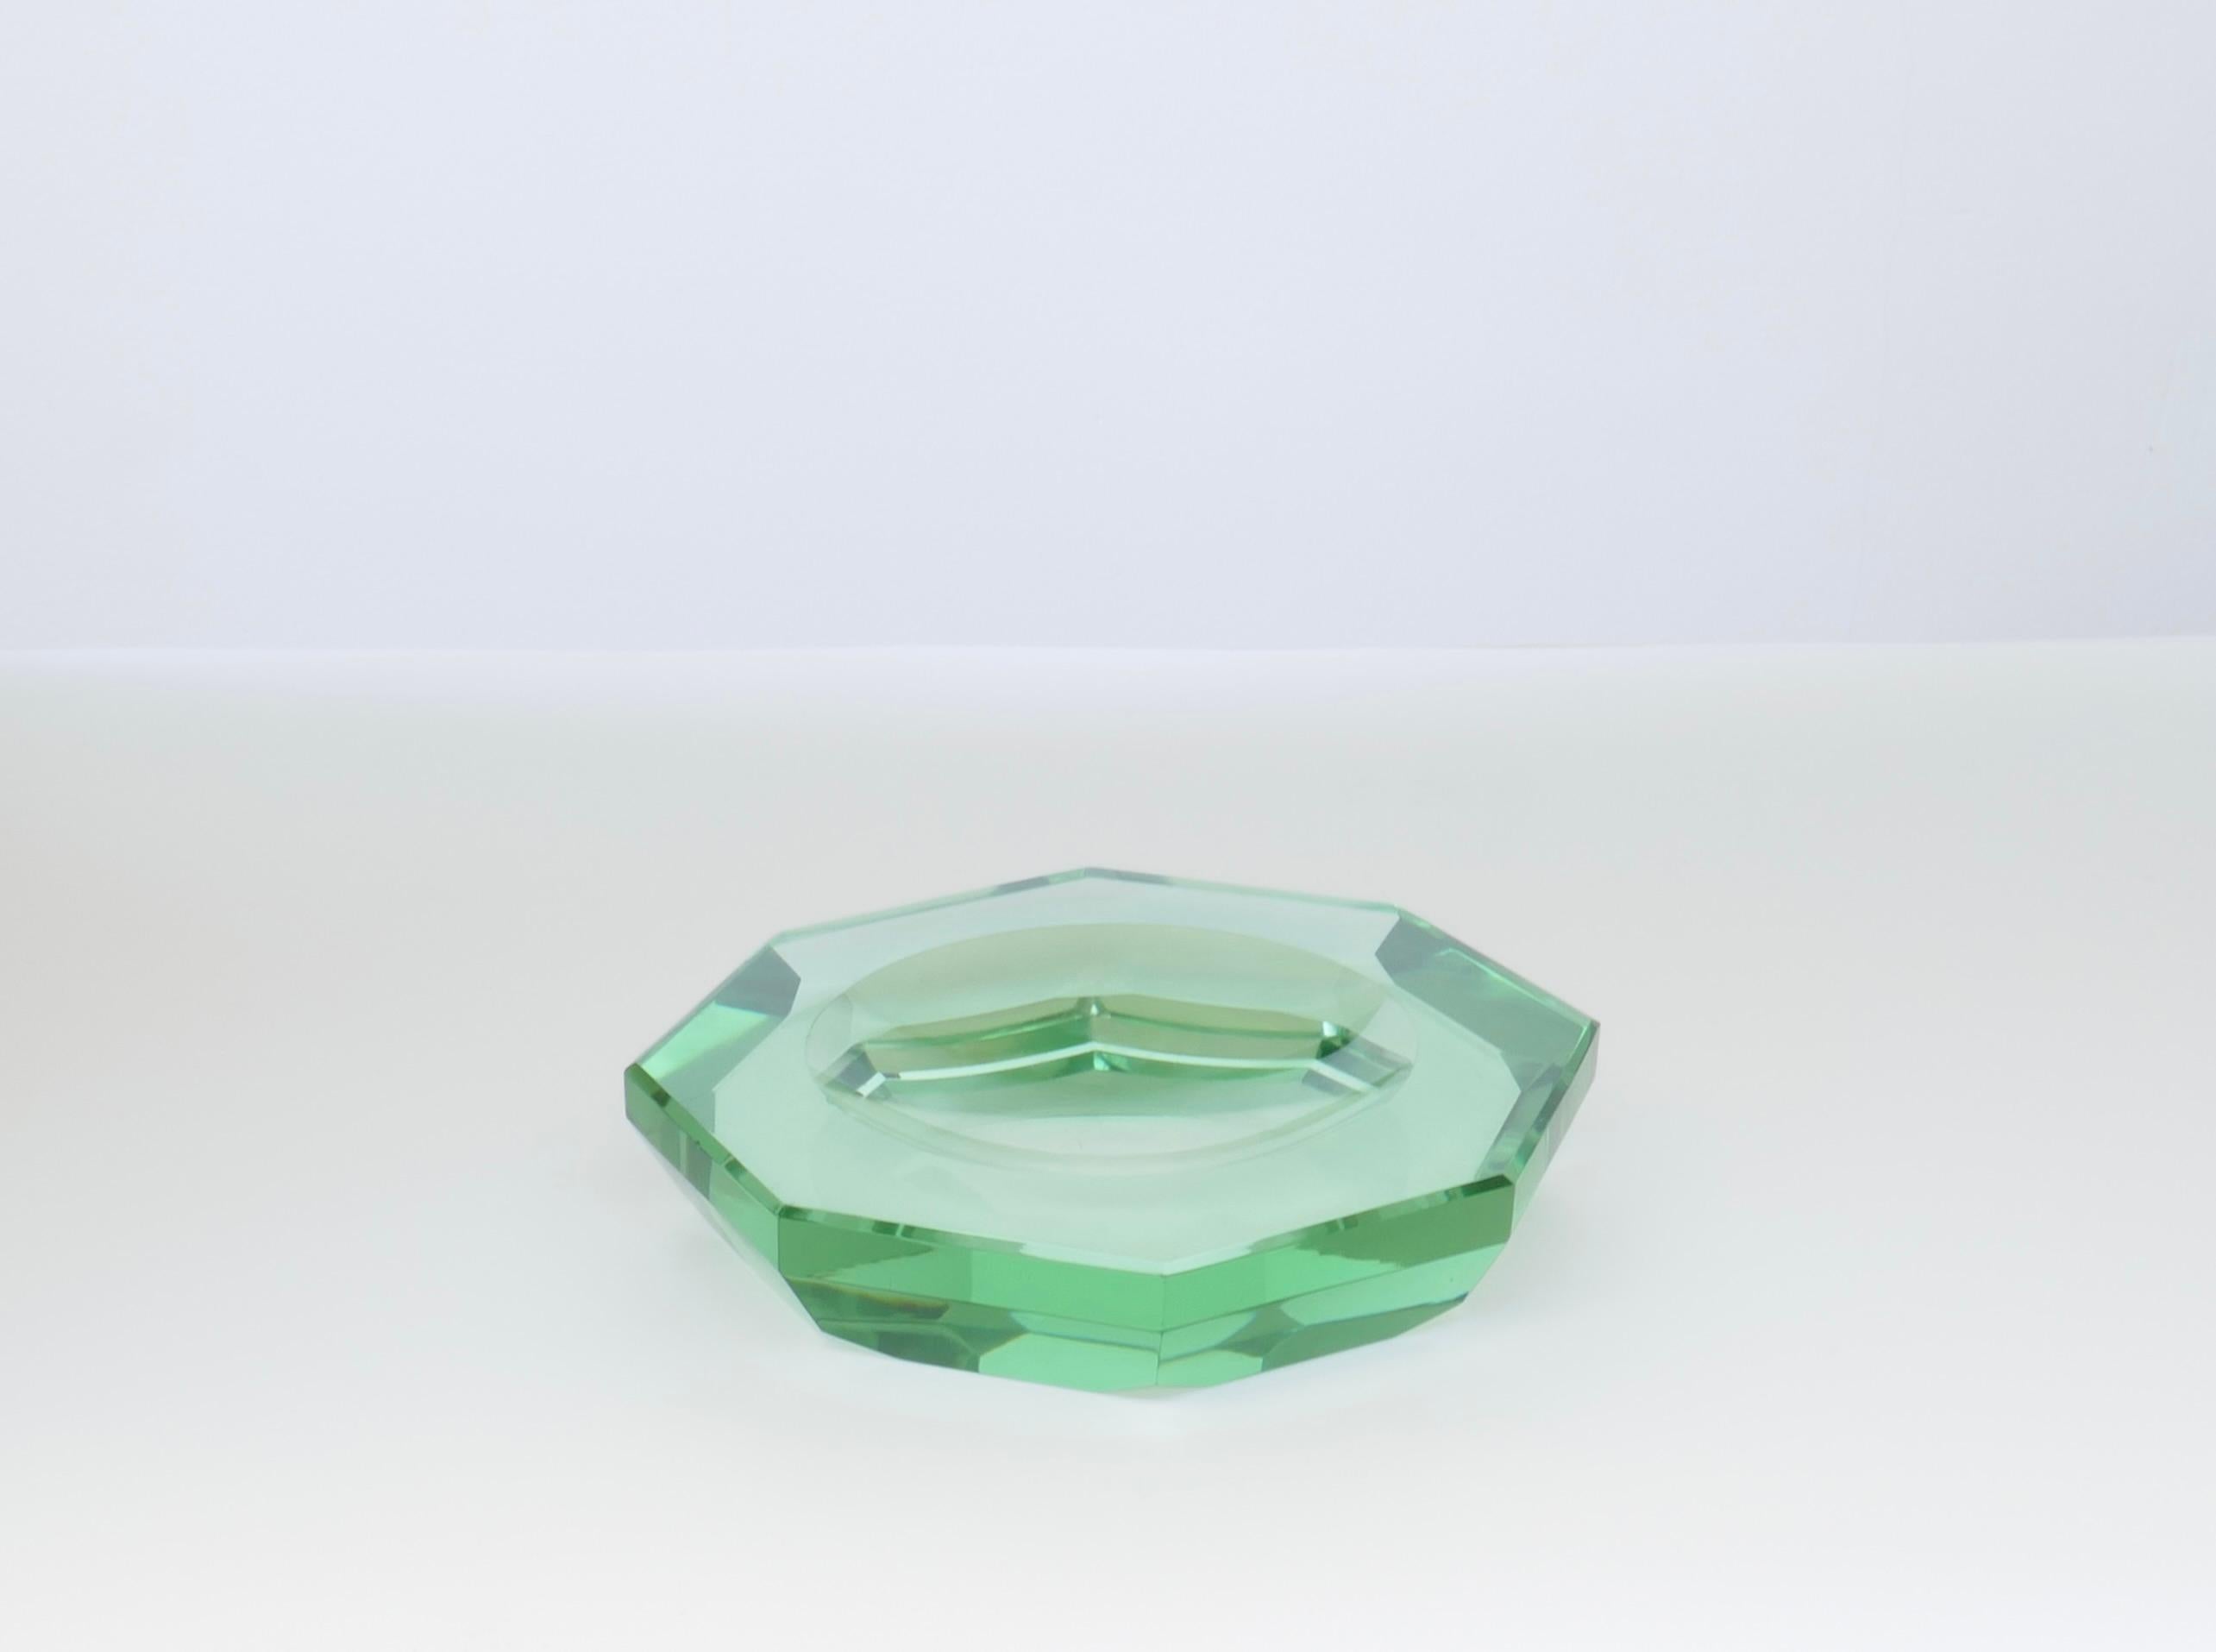 Octagonal Green Centrepiece / Vide Poche by Fontana Arte, Italy, 1950s In Good Condition For Sale In London, GB